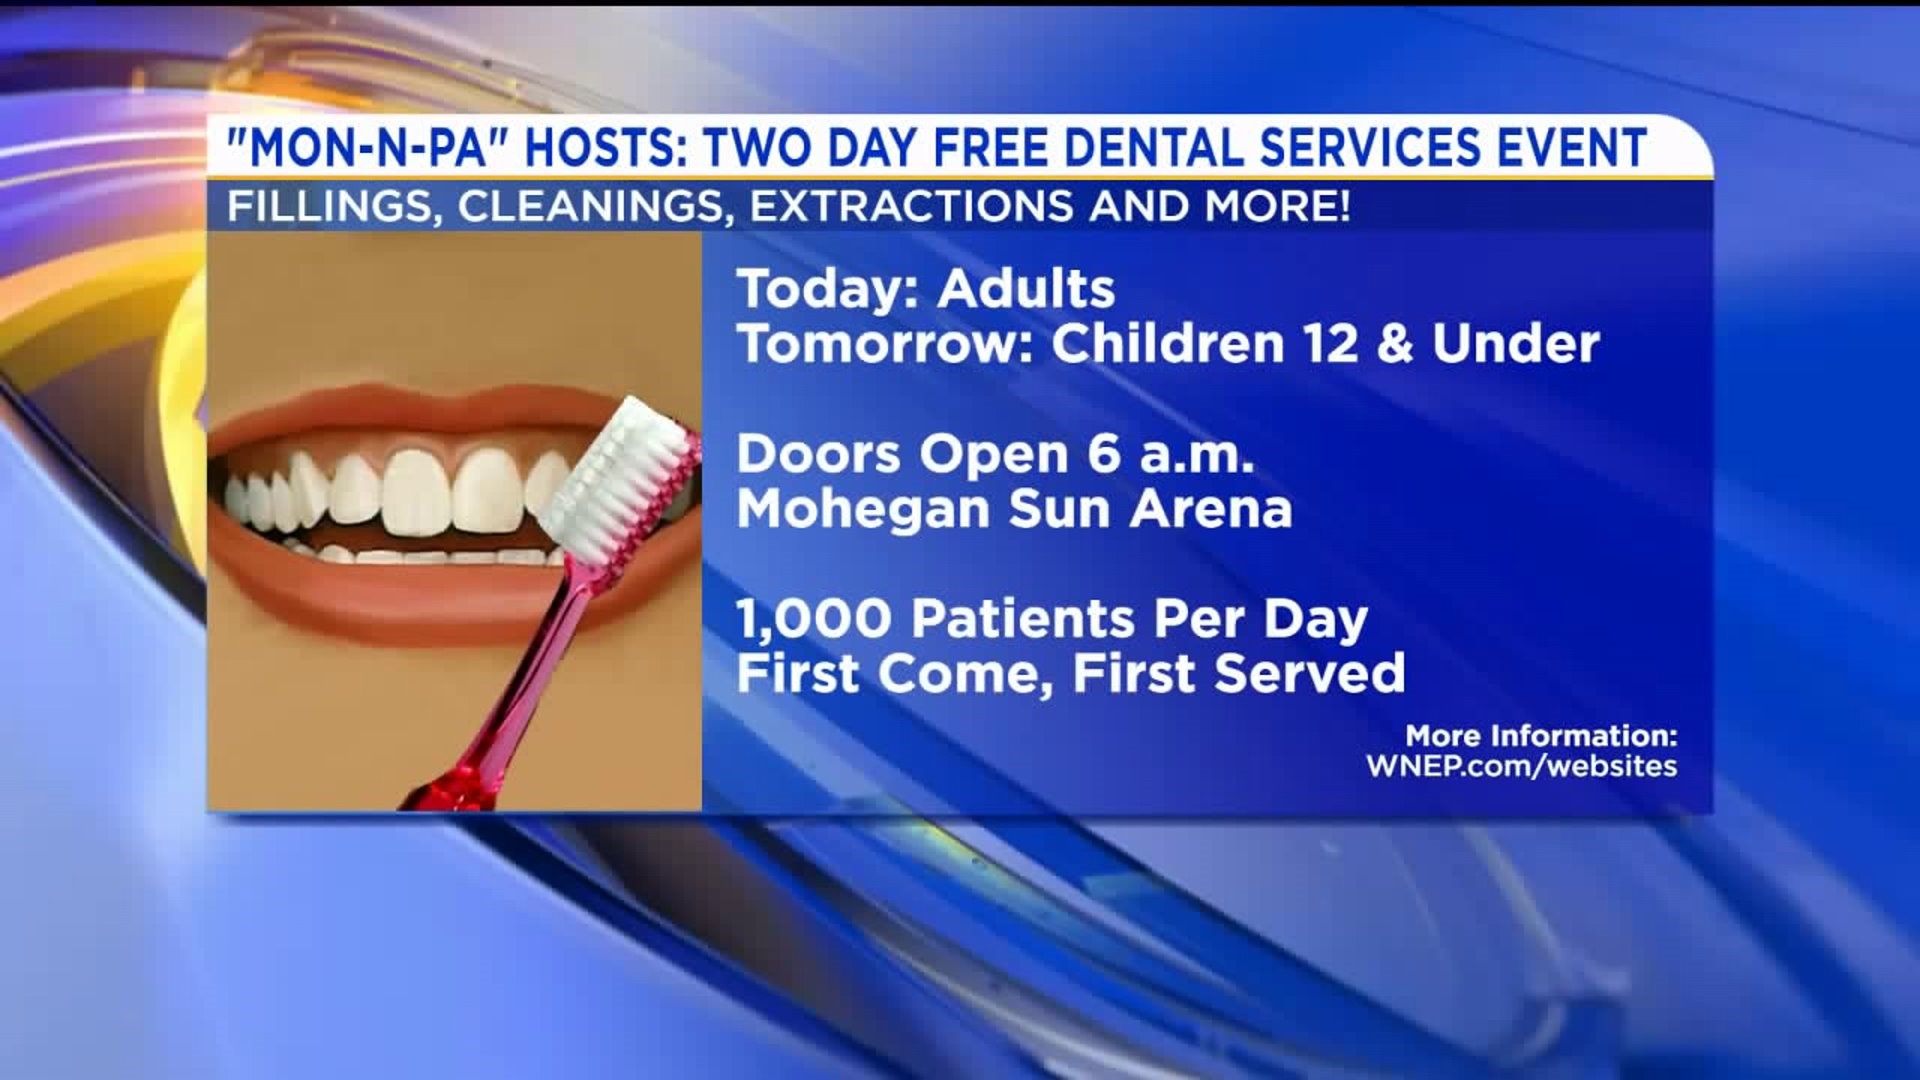 Free Dental Care this Weekend Near Wilkes-Barre